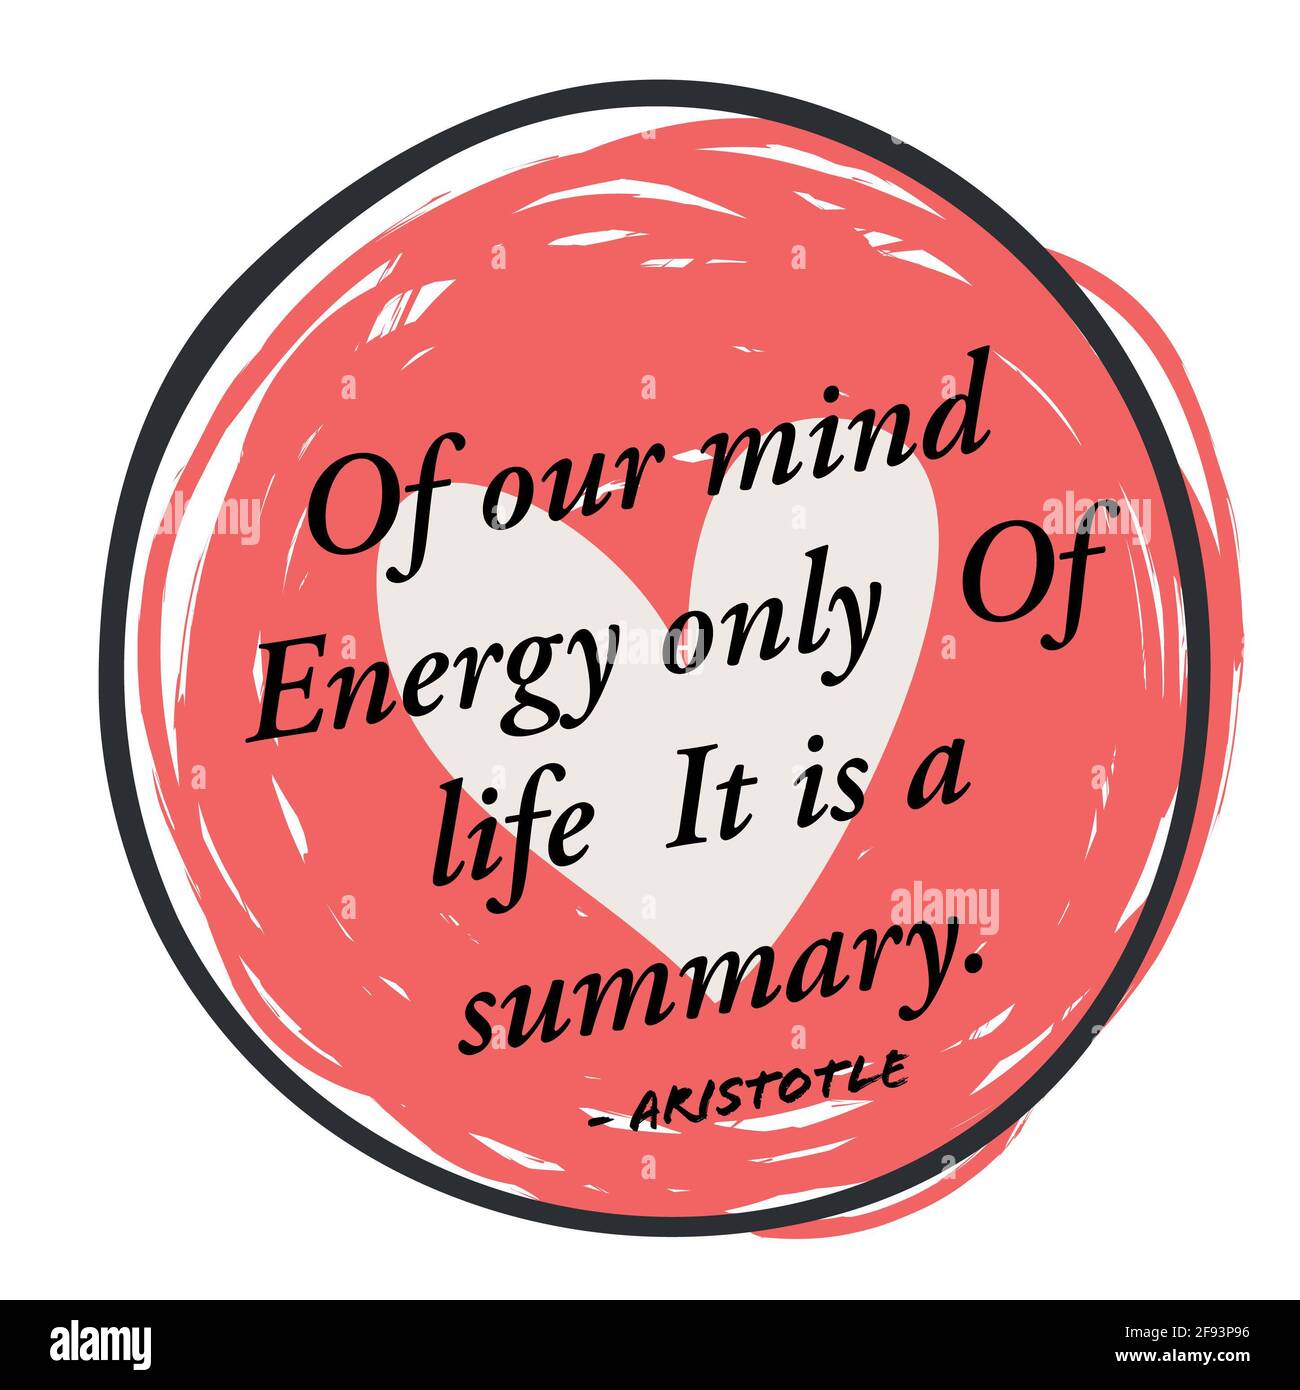 Of our mind  Energy only  Of life  It is a summary.  - Aristotle Quotes illustration Stock Photo